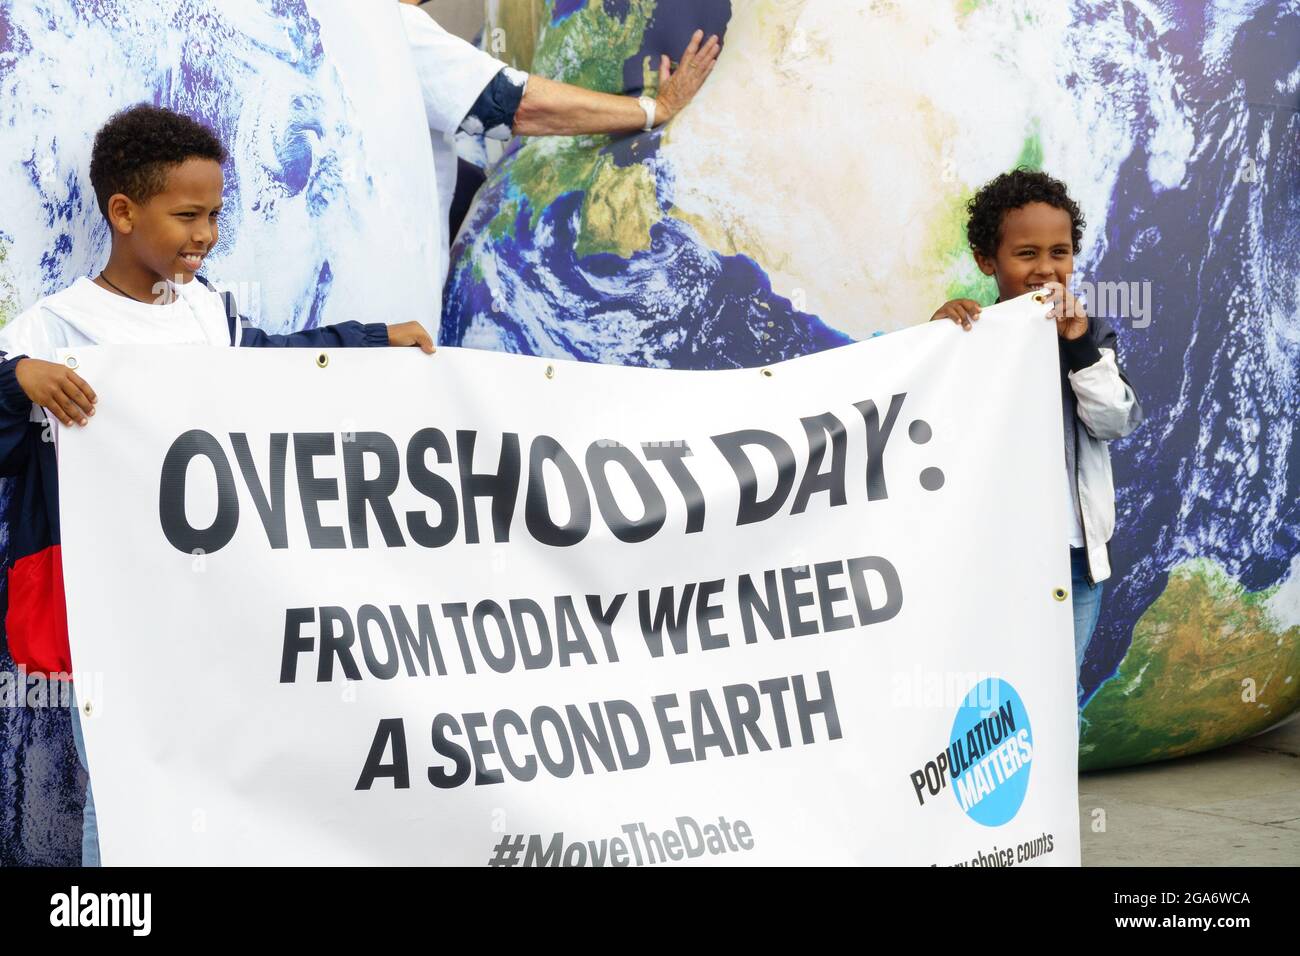 London, U.K. 29th July 2021. Earth Overshoot Day demonstration by Population Matters charity on Trafalgar Square, London. Raising awareness of overusing Earth’s natural resources by an ever increasing population and the effect this has on climate change. Many families on school holidays engaging with the charity’s inflatable Earths. Credit: Bradley Taylor / Alamy Live News Stock Photo